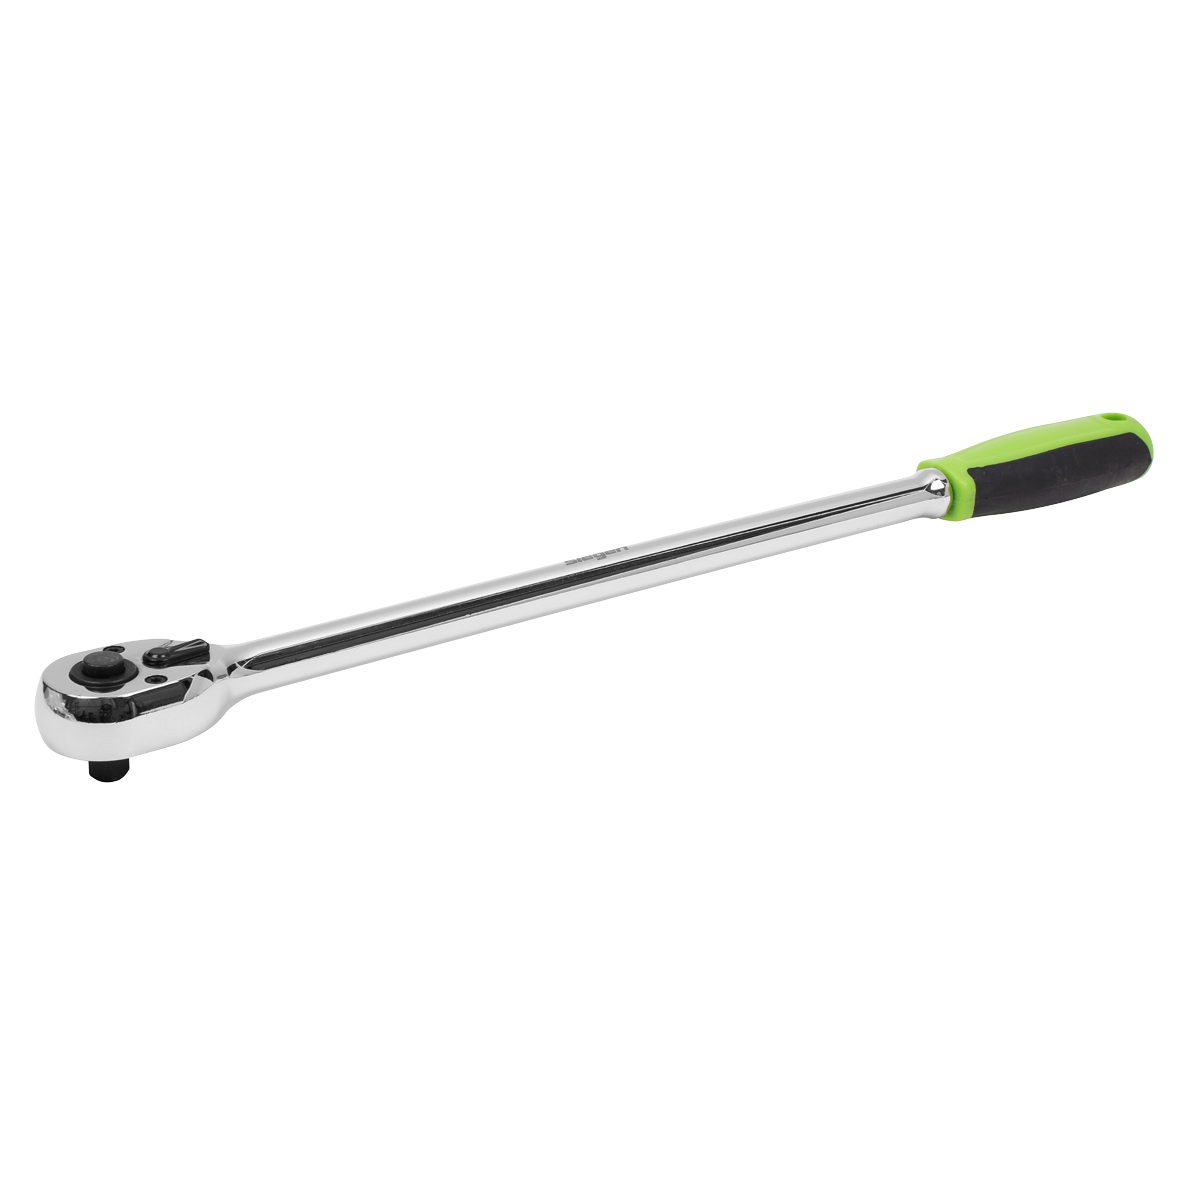 Ratchet Wrench 1/4"Sq Drive Extra-Long Flip Reverse - S01256 - Farming Parts